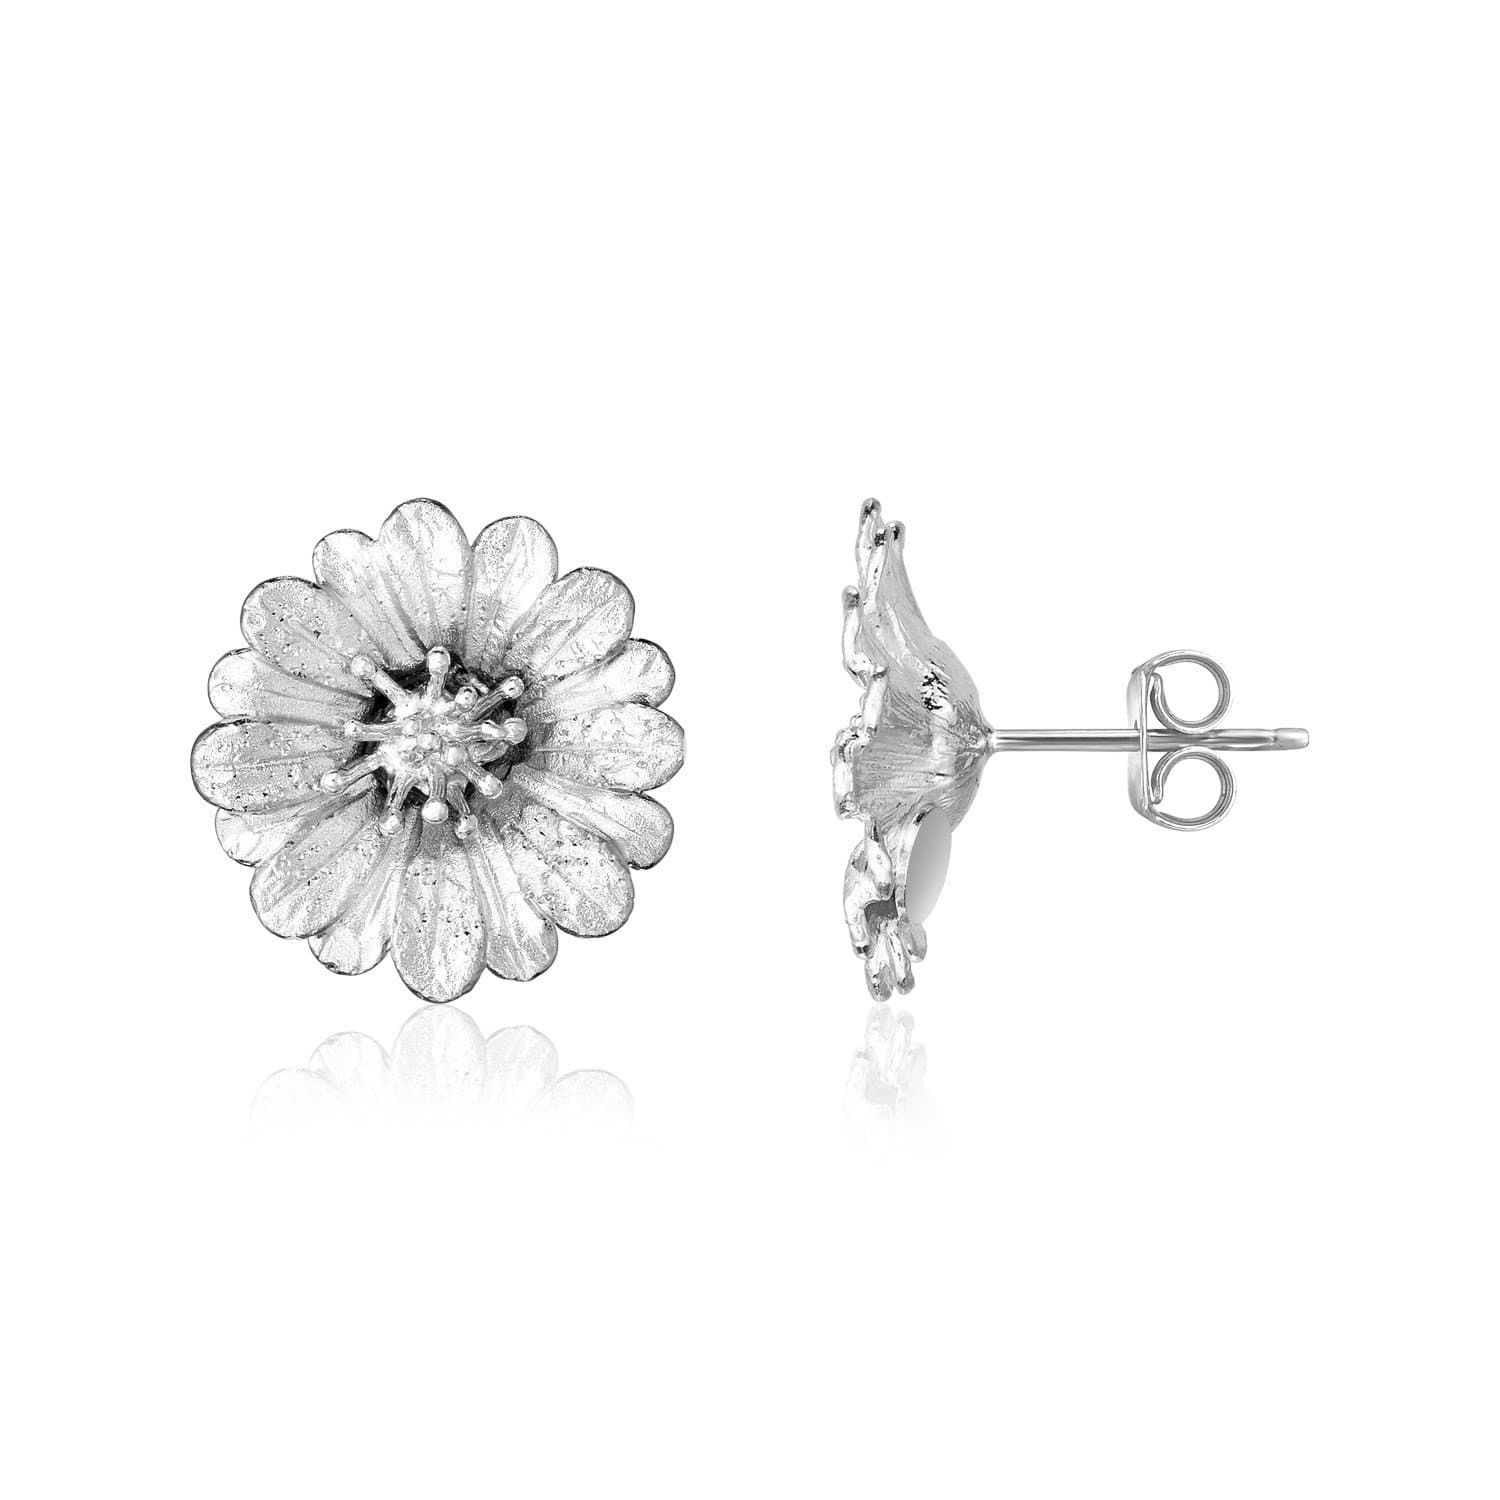 Sterling Silver Flower Earrings with Sparkle Texture